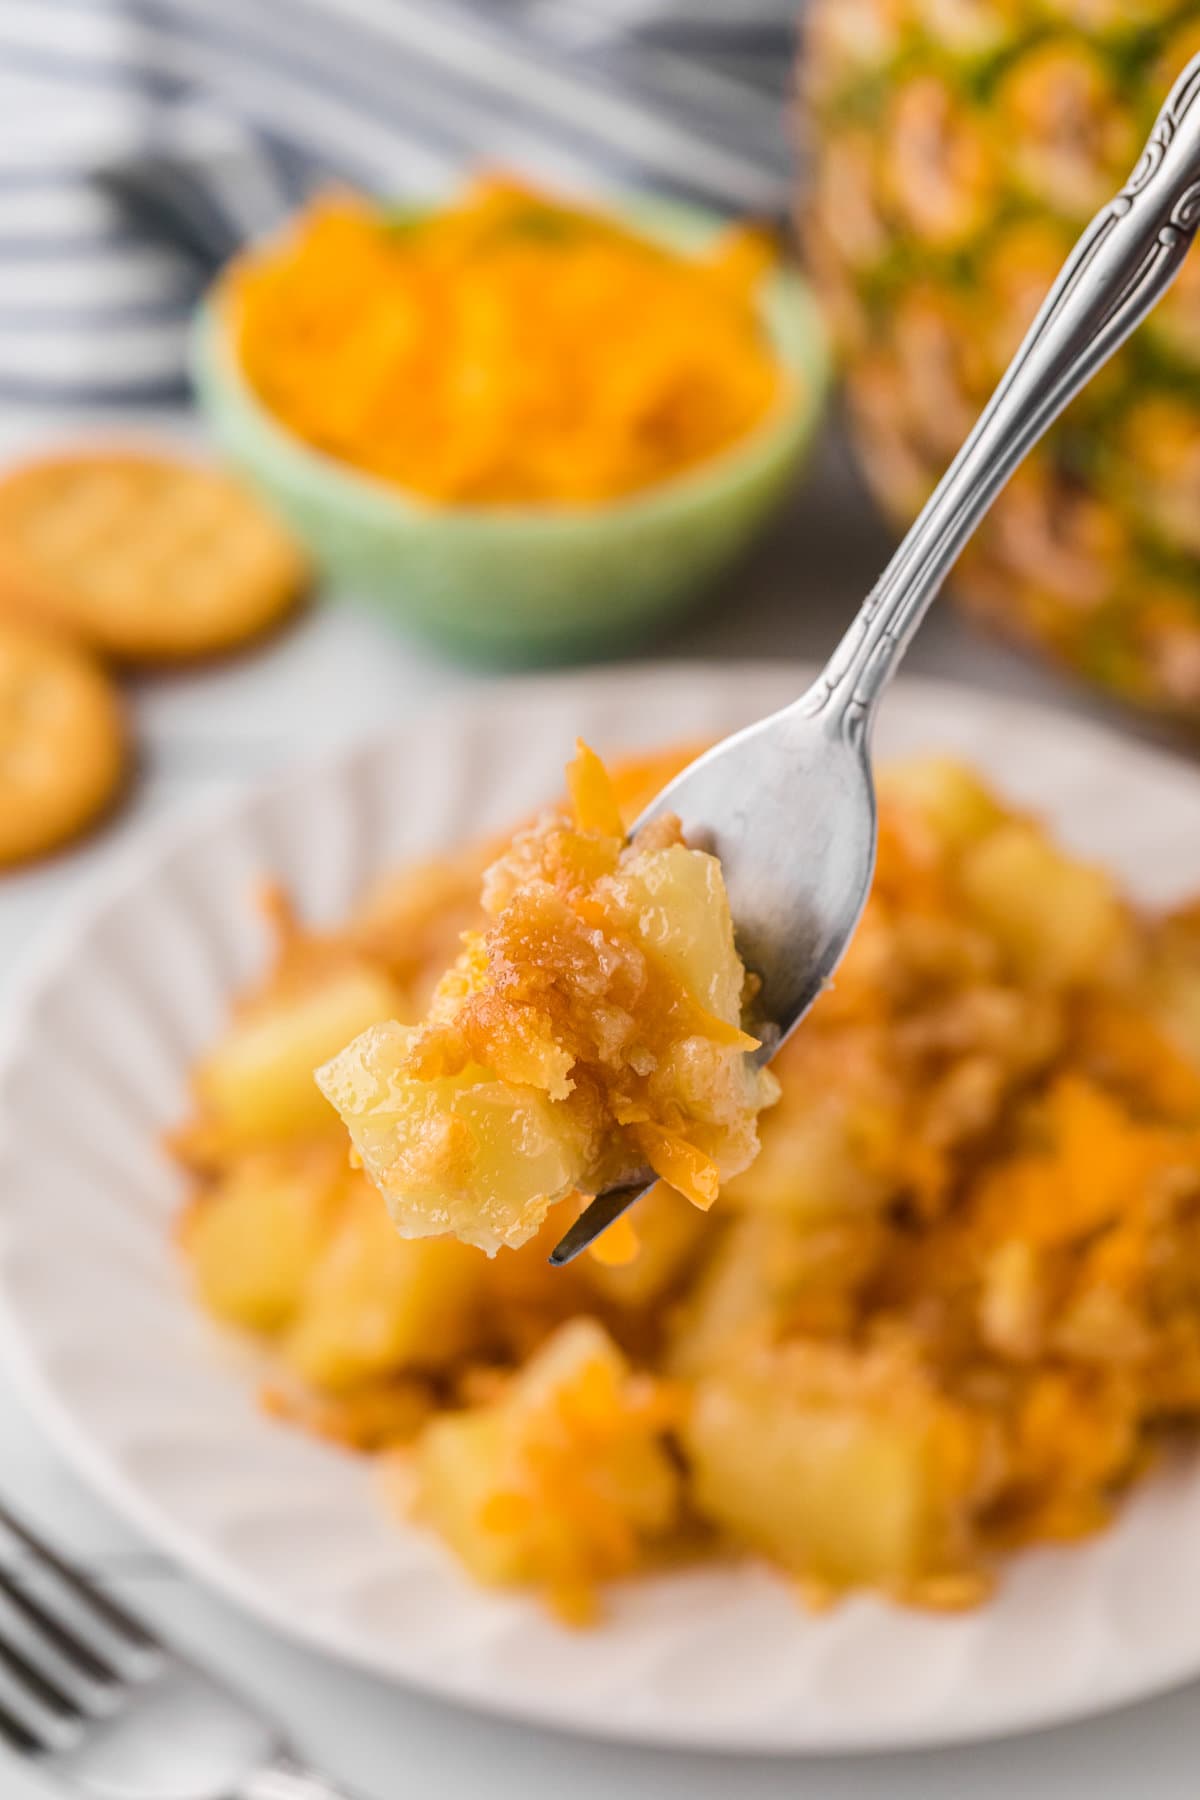 A fork with a bite of pineapple casserole on it.